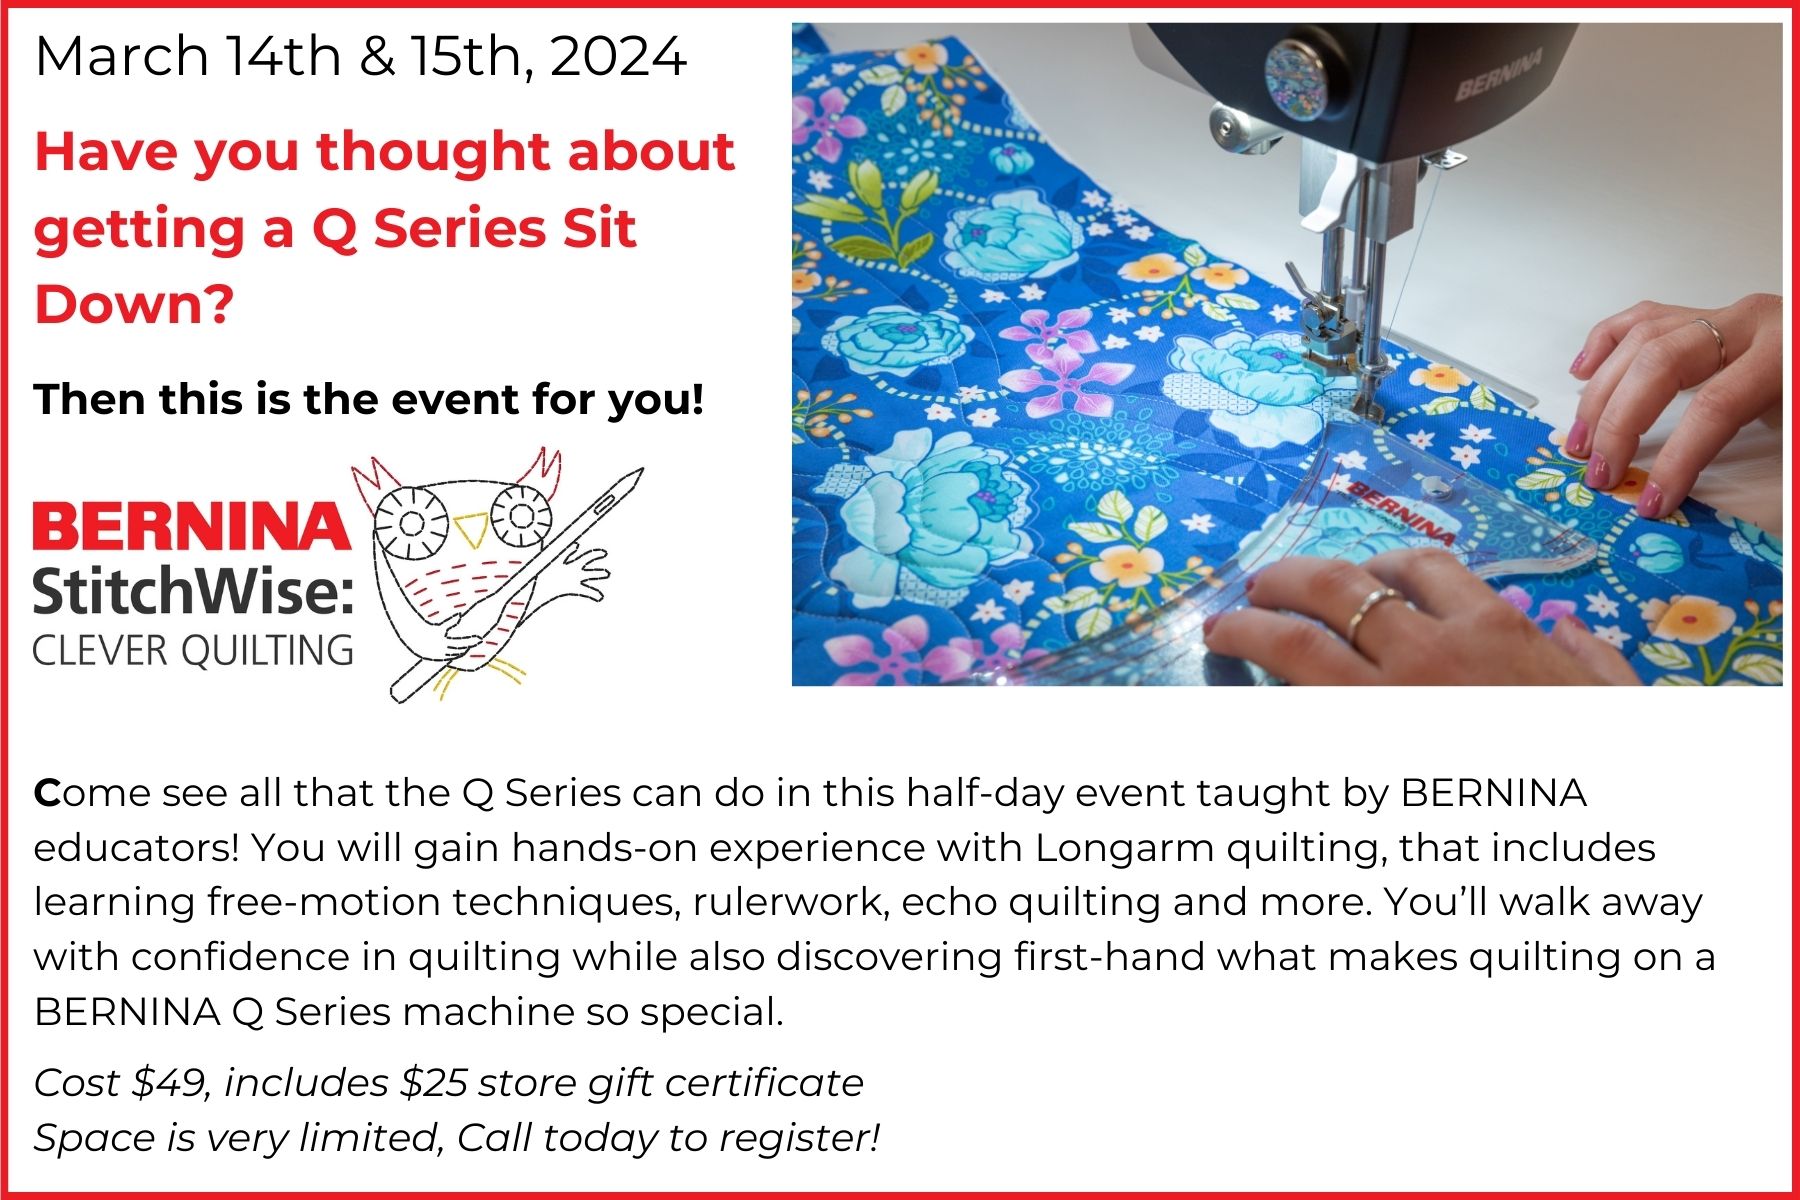 March Stitchwise Quilting Event Postcard (1800 x 1200 px)